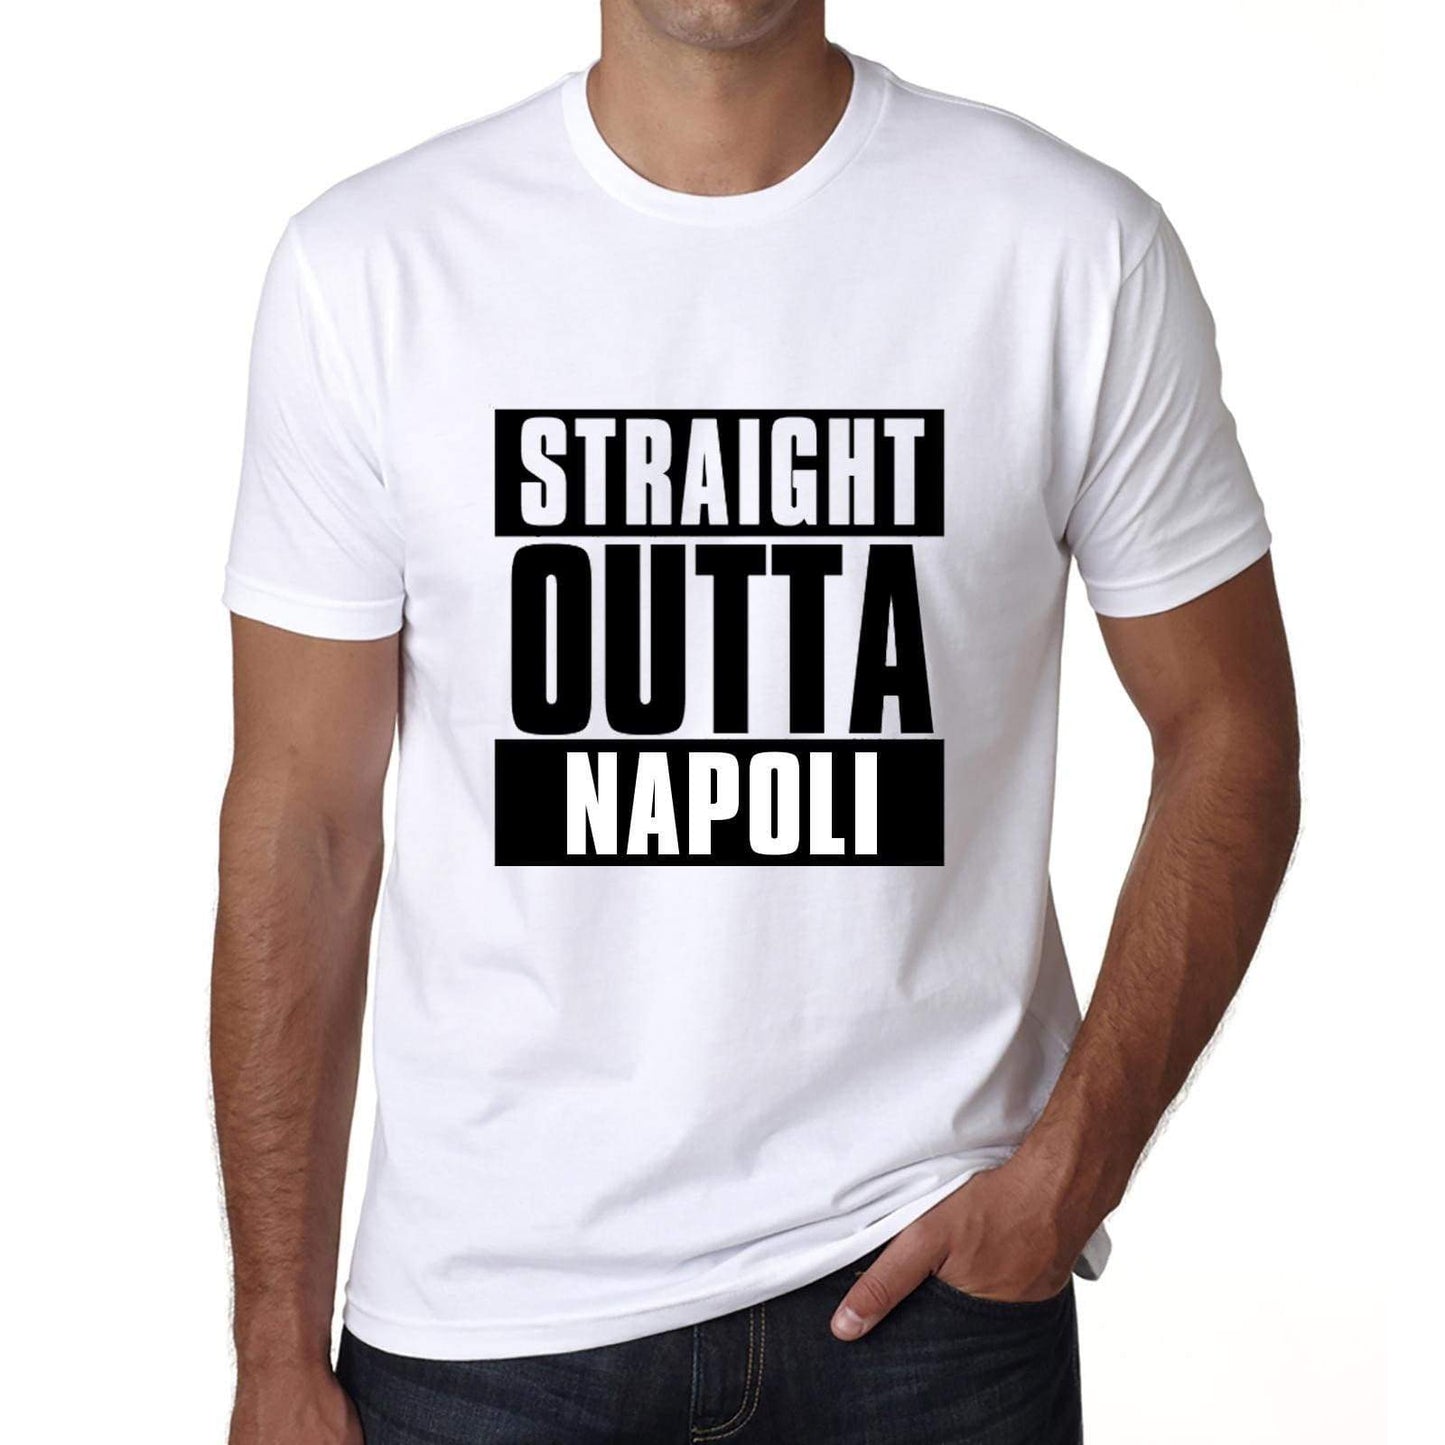 Straight Outta Napoli Mens Short Sleeve Round Neck T-Shirt 00027 - White / S - Casual